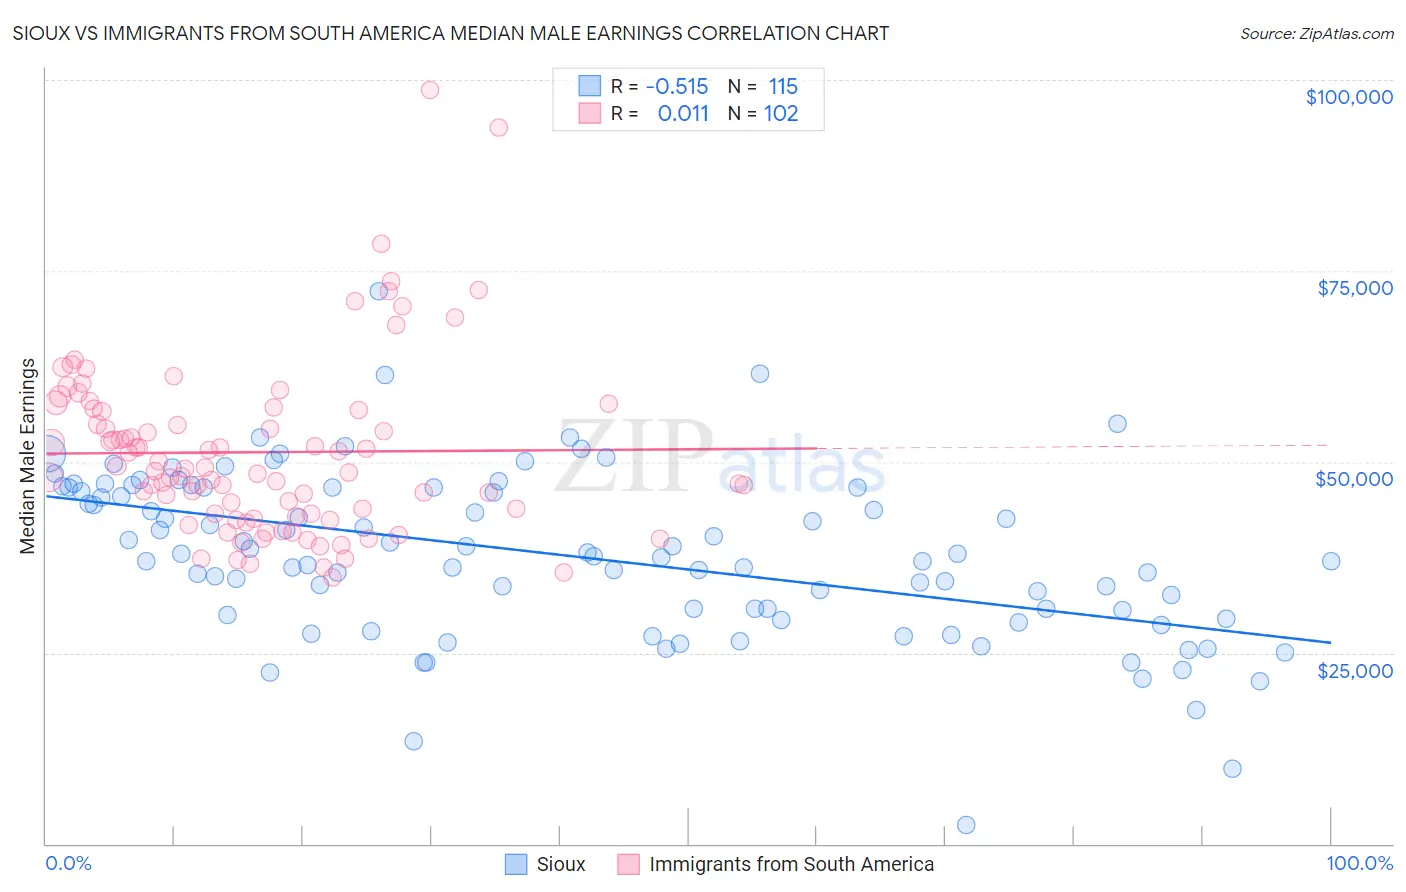 Sioux vs Immigrants from South America Median Male Earnings